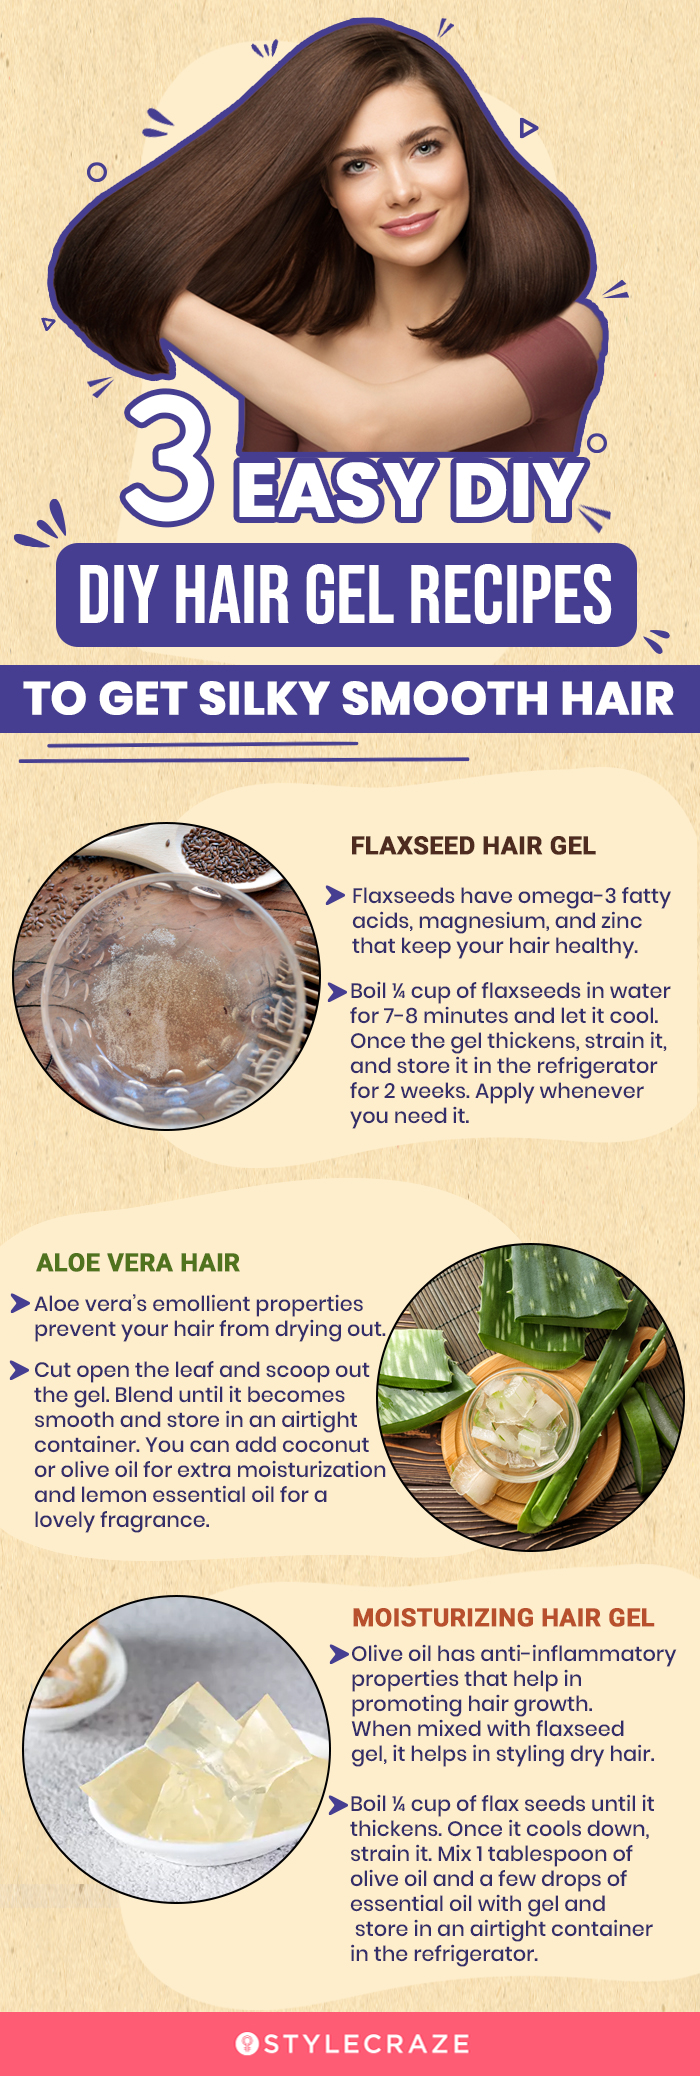 5 Natural And Effective DIY Hair Gel Recipes you Must Try